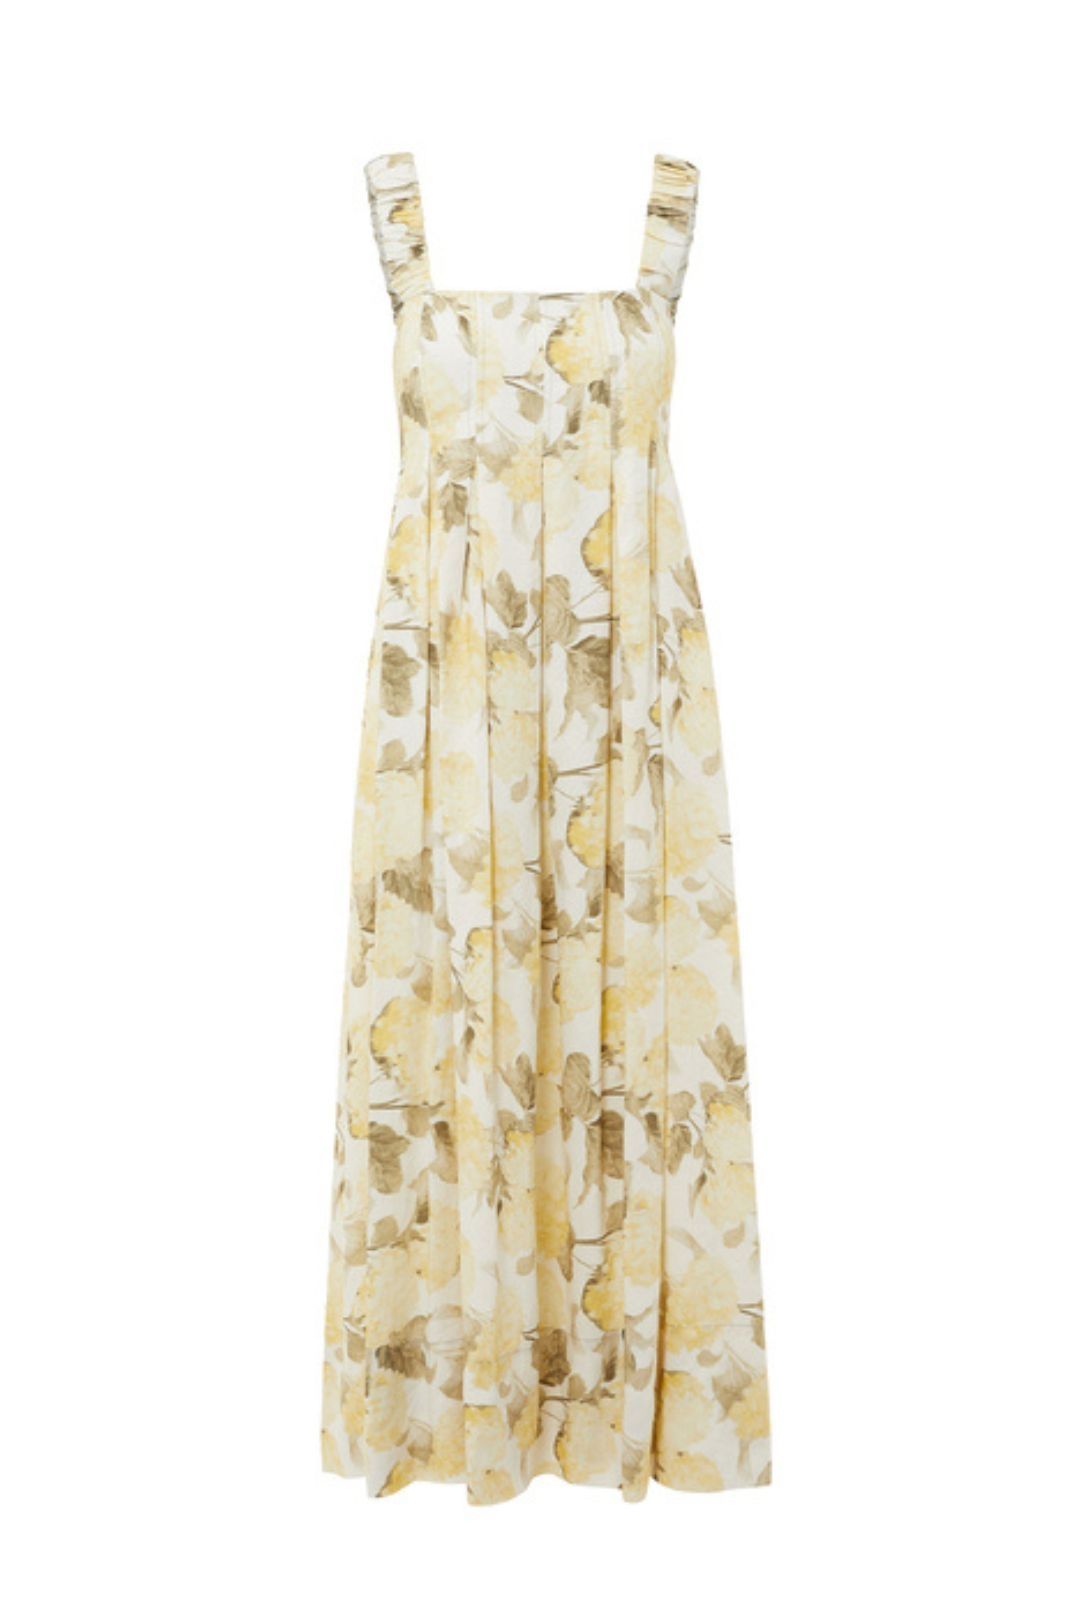 Acler Exeter Dress Floral